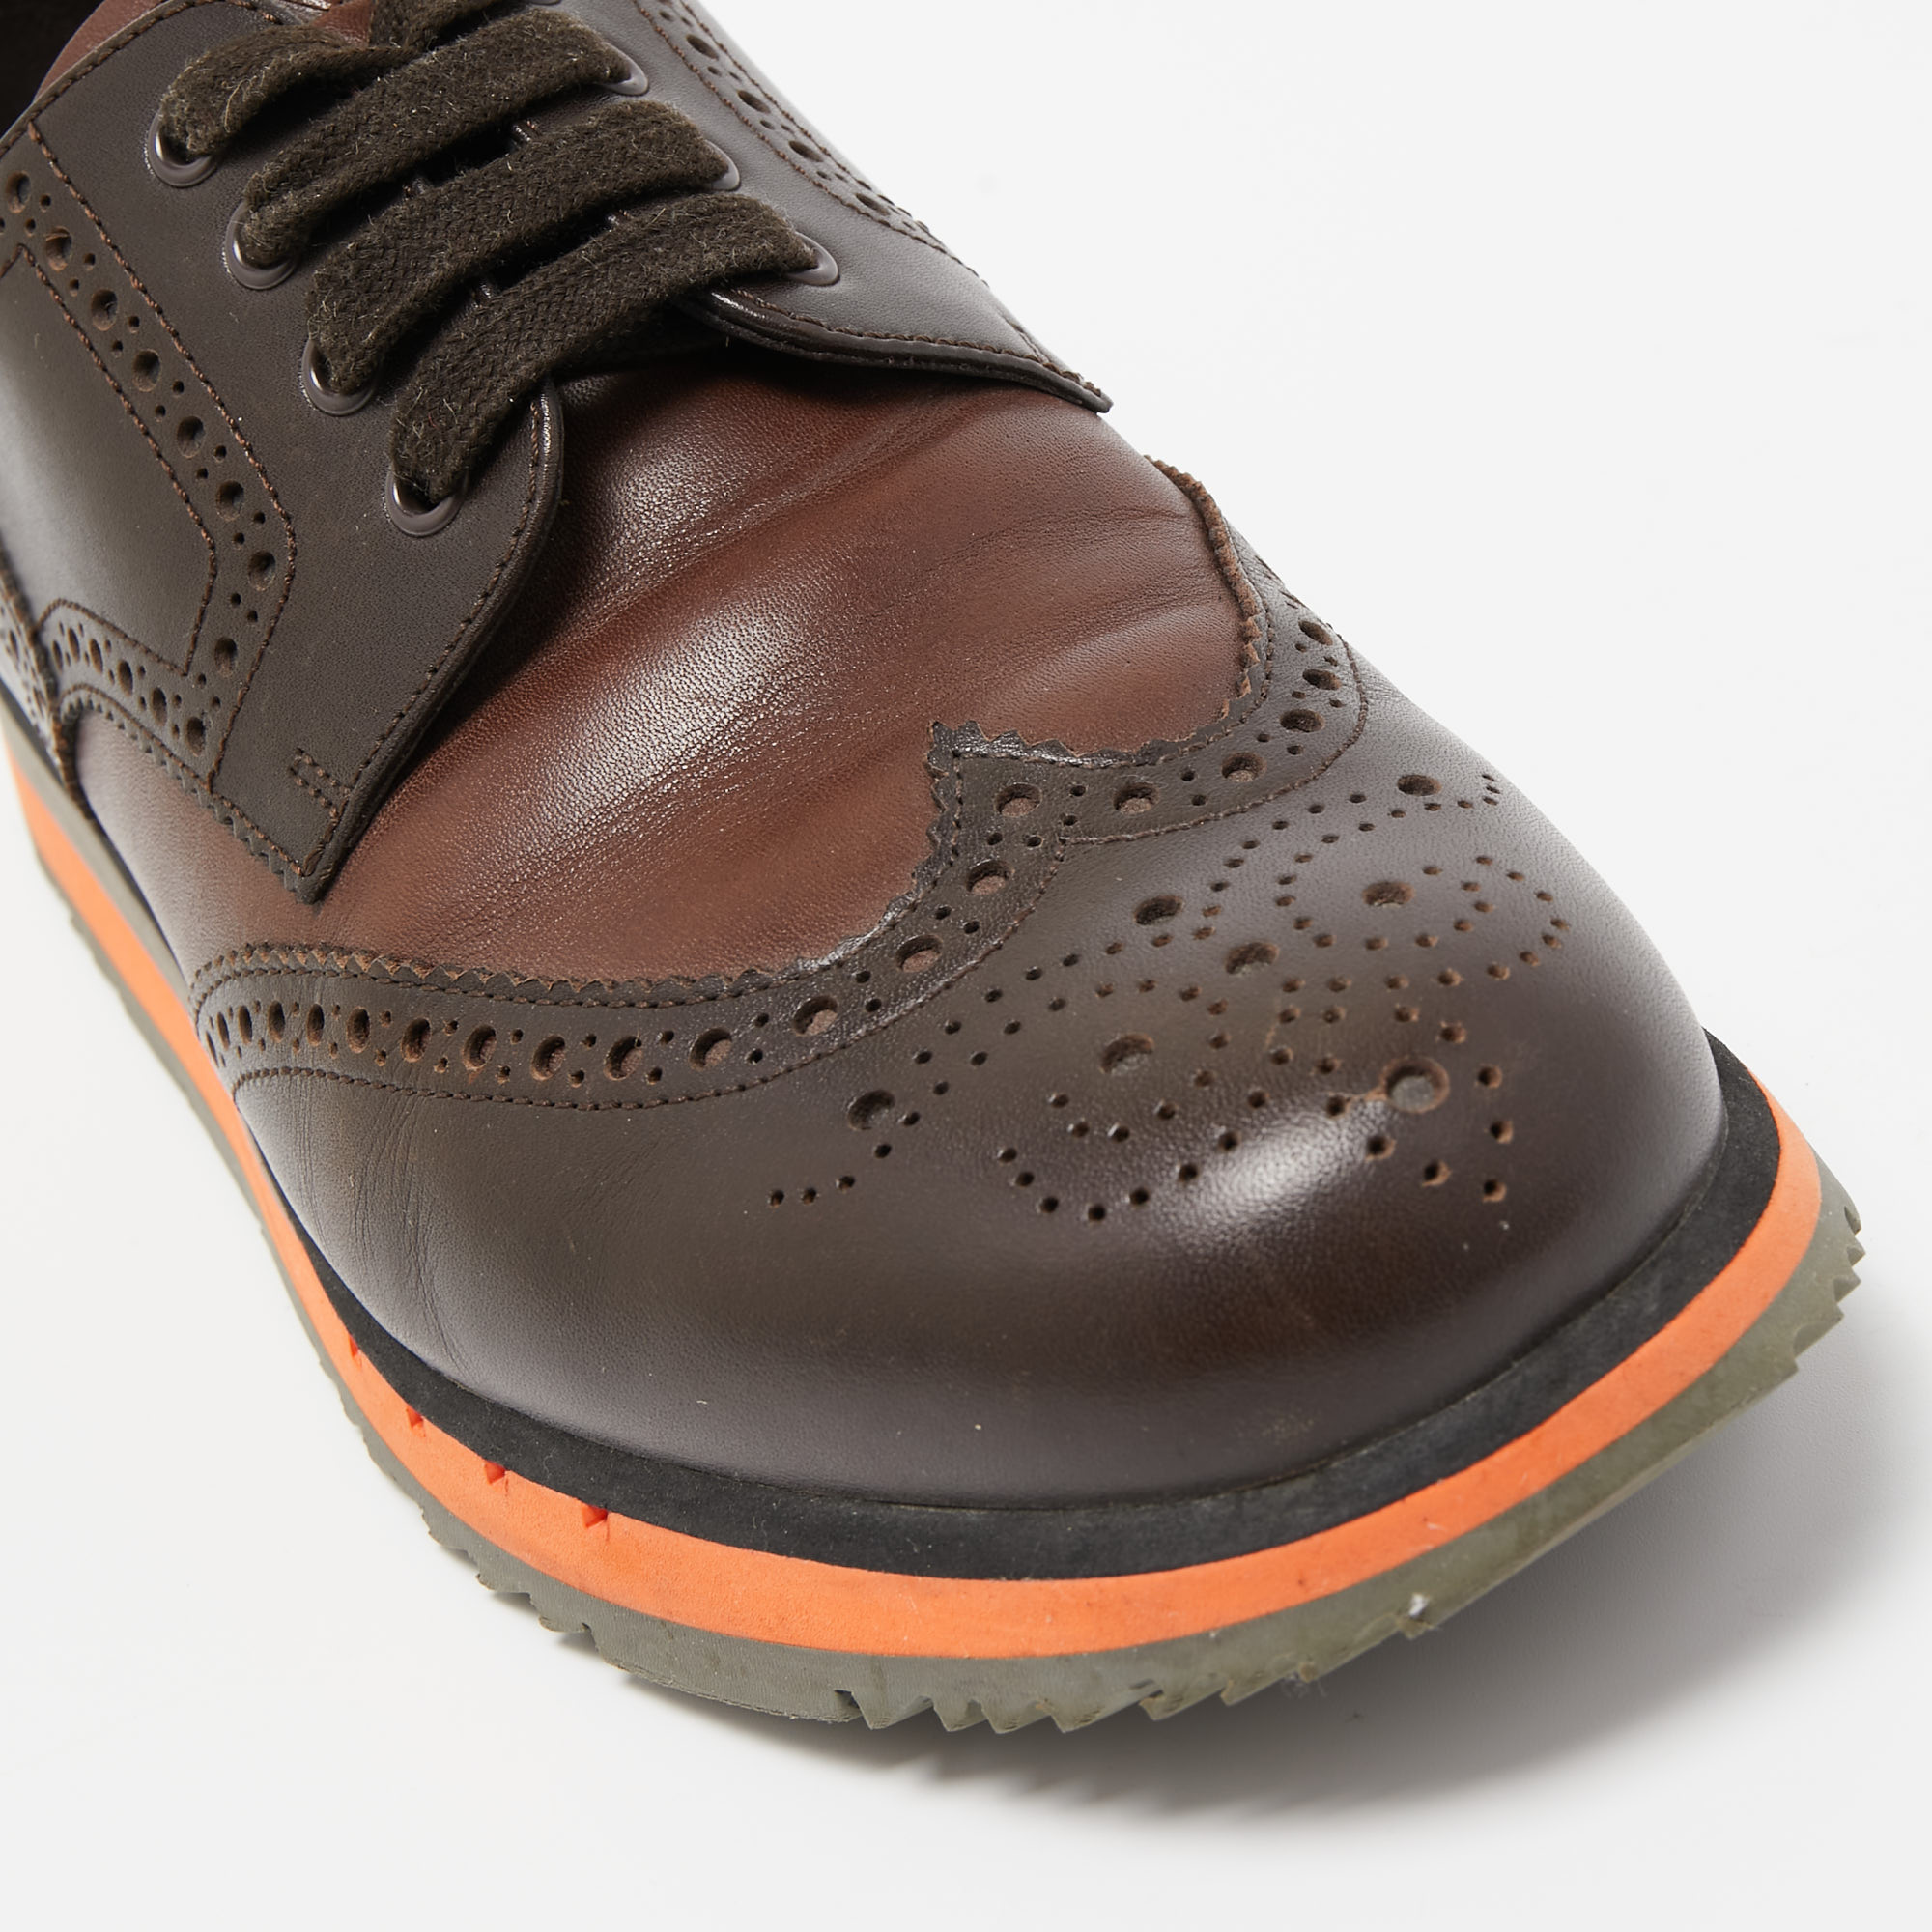 Prada Sport Brown Brogue Leather Derby Sneakers Size 42.5